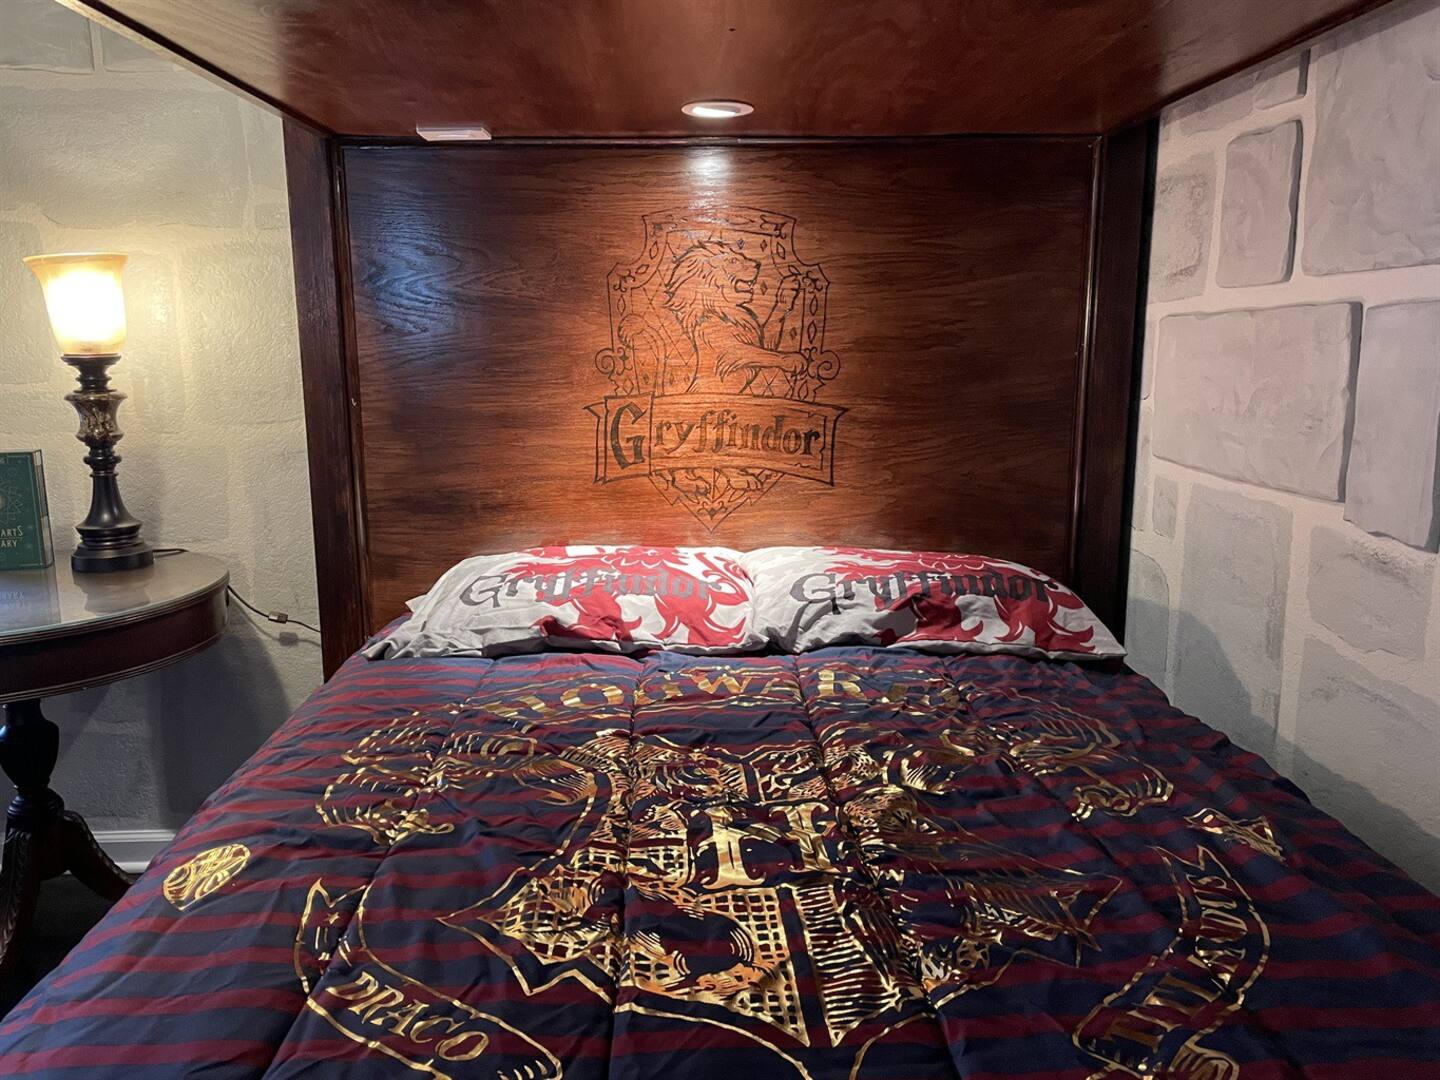 The headboard of the unique bed is engraved with the Gryffindor logo.